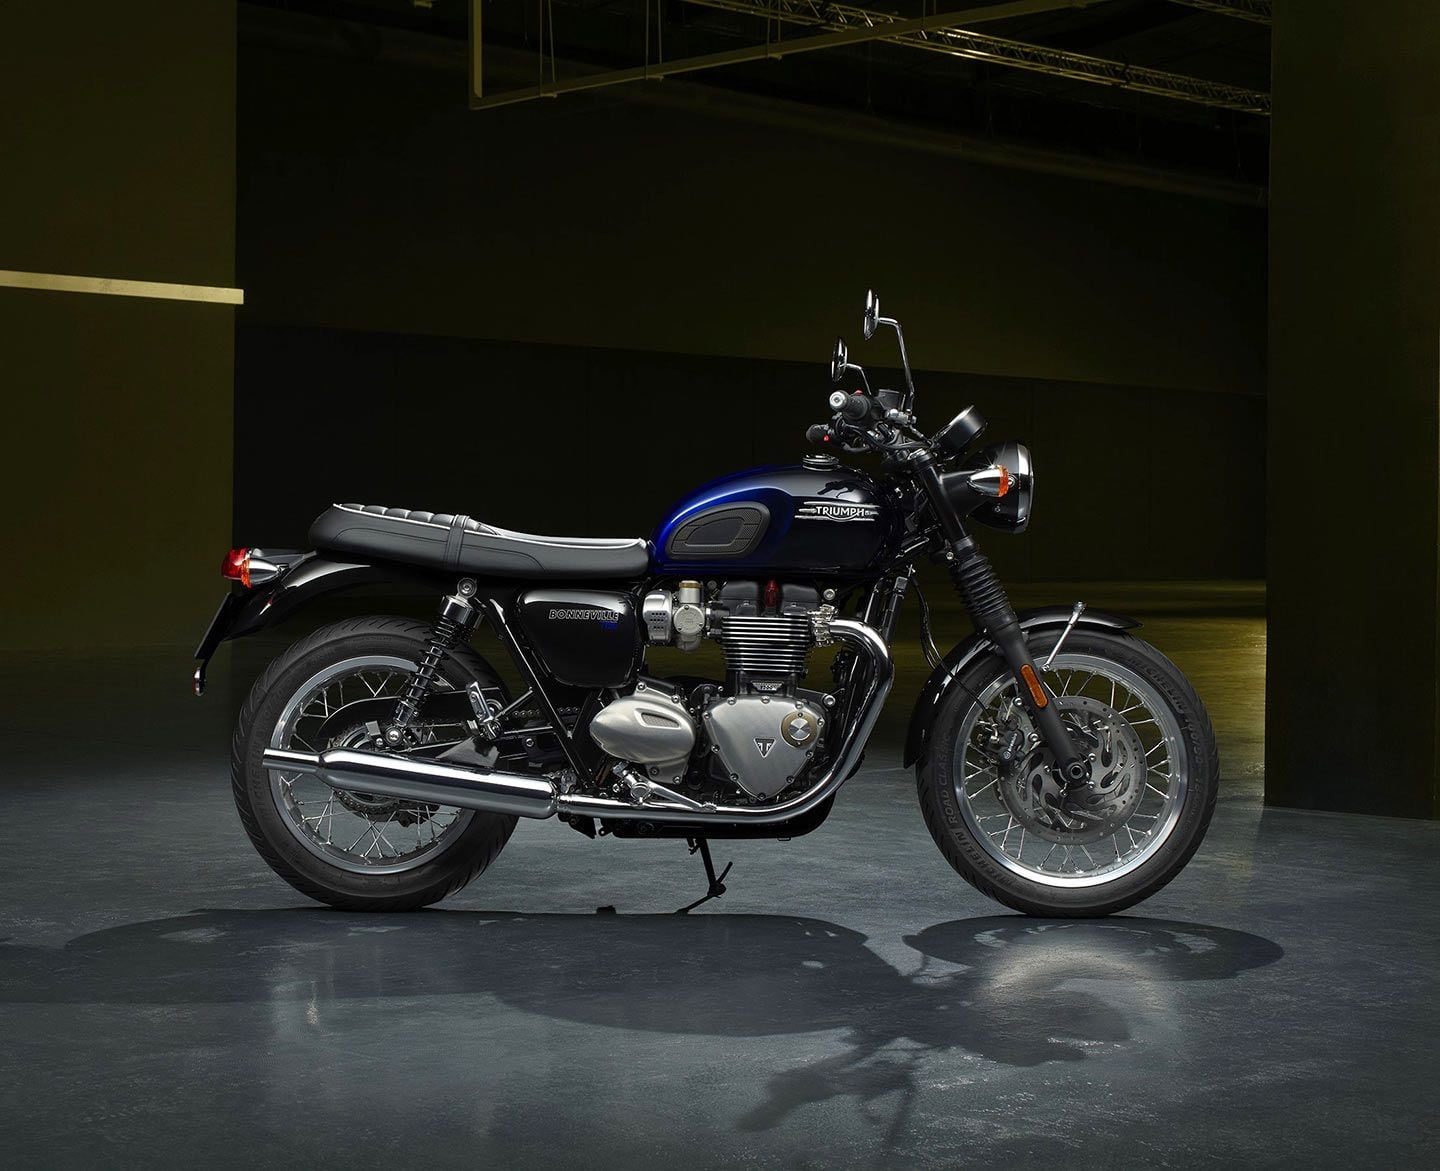 The higher-spec T120 Blue Stealth gets the same paint treatment, but rolls with a 1,200cc engine and more premium components.